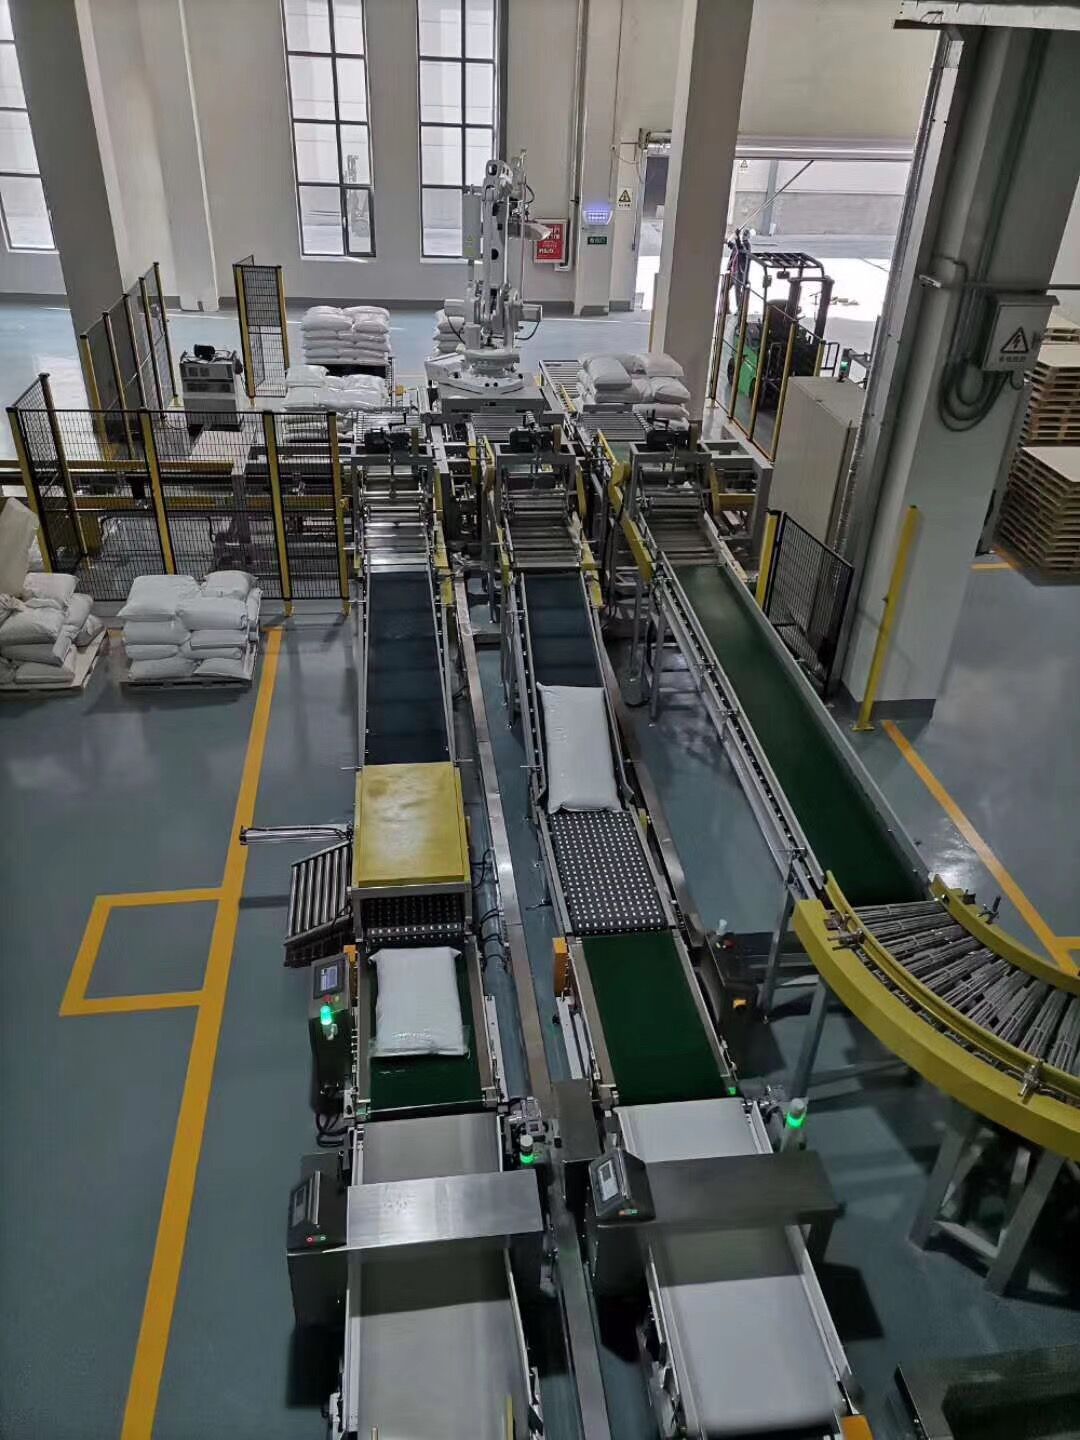 Fully Automatic Packing Palletizing Line, Containerised Bagging System, Mobile Bagging Unit, Mobile Containserized Bagging Unit, Fully Automatic Packing System, Wuxi HY Machinery Co., Ltd.